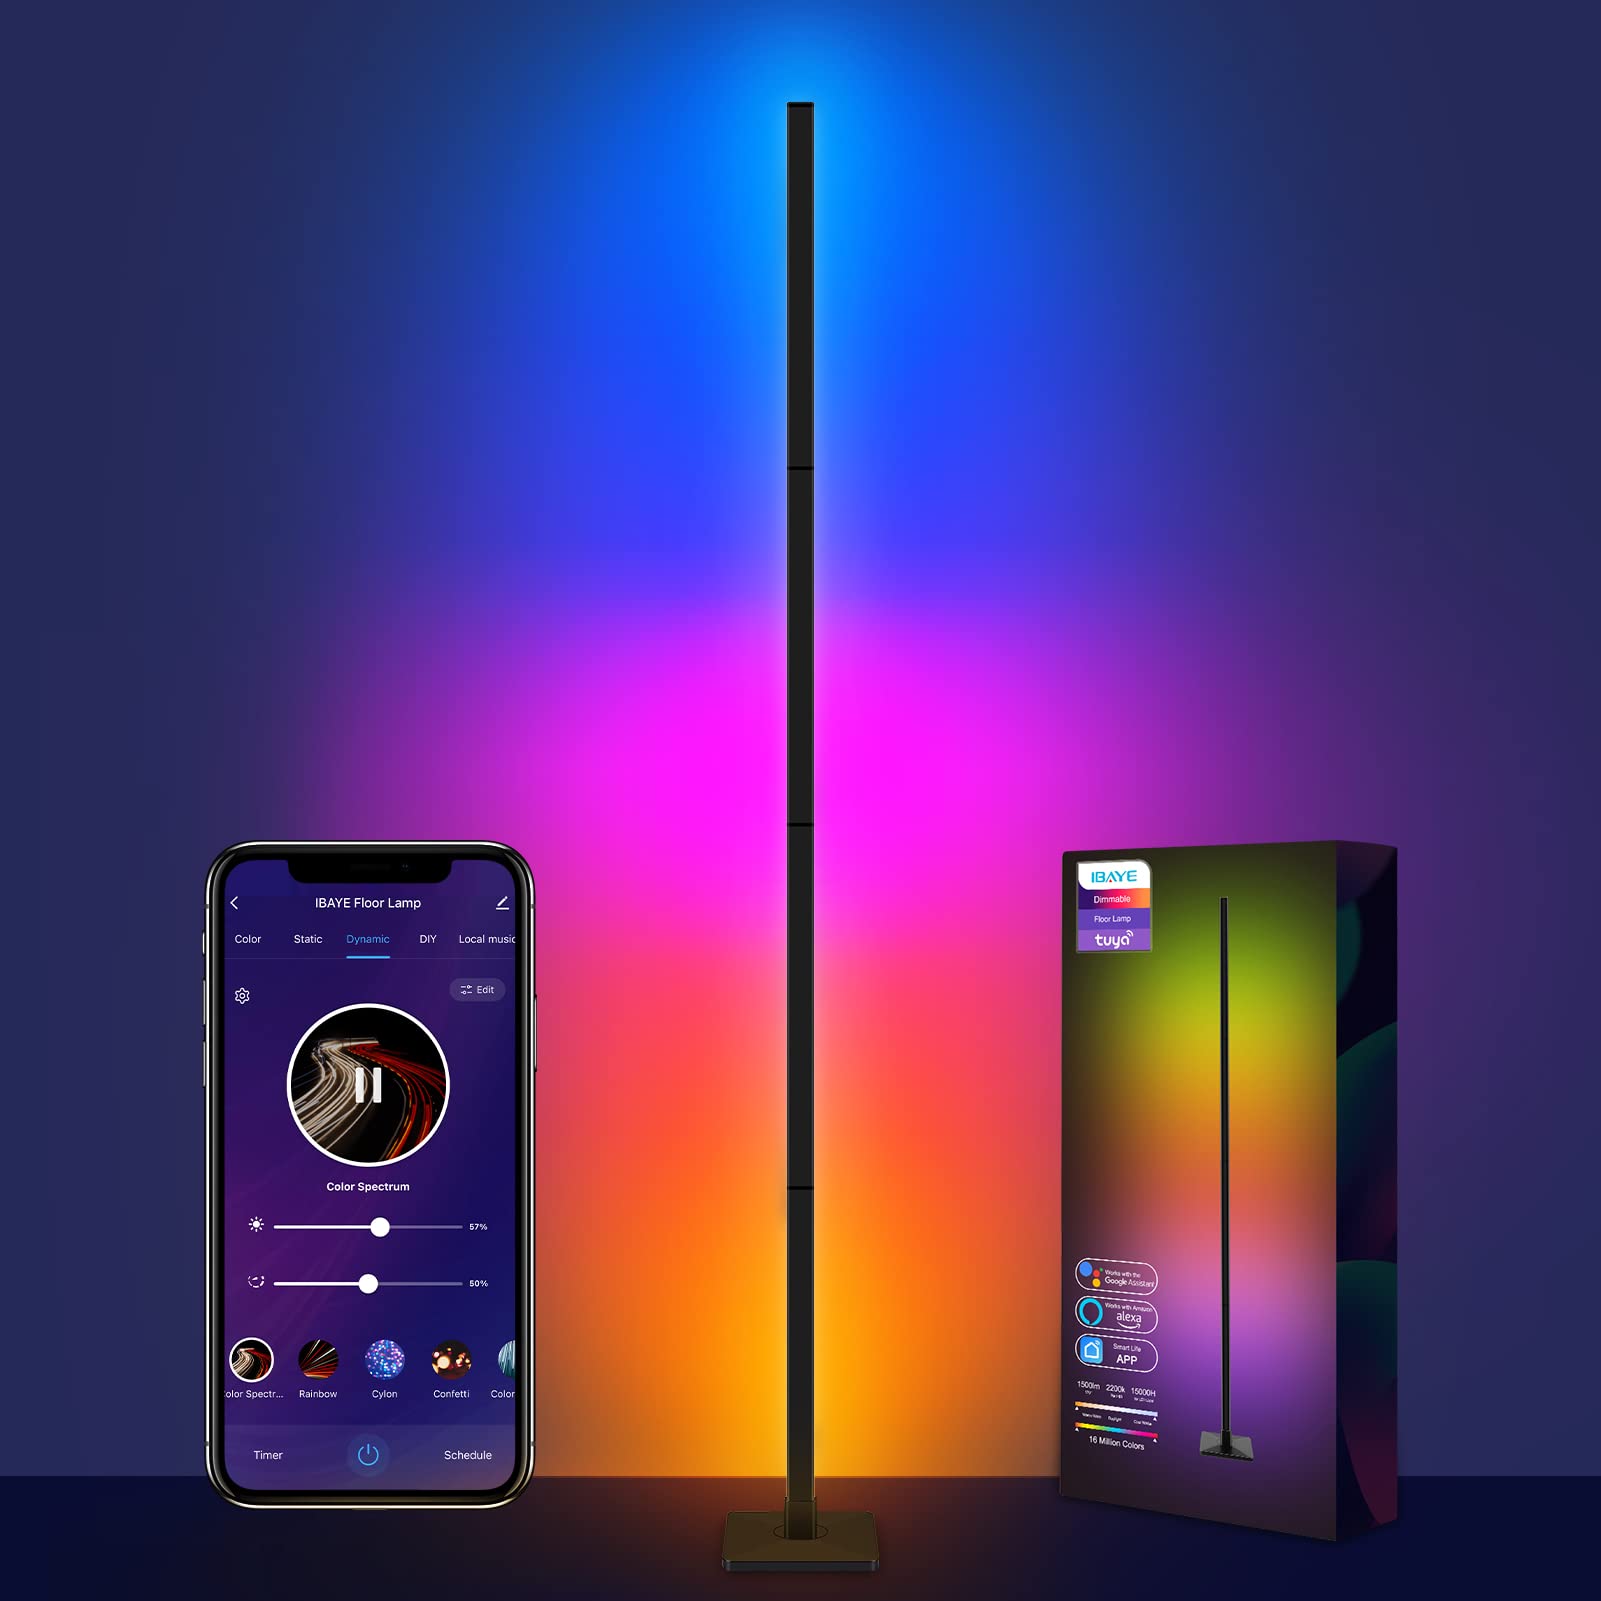 IBAYE Smart LED Floor Lamp, RGB Corner Floor Lamp, Music and DIY Mode, Modern Standing Lamp with Alexa, Google Assistant and WiFi APP, Color Changing Mood Lighting for Living Room, Bedroom (Black)